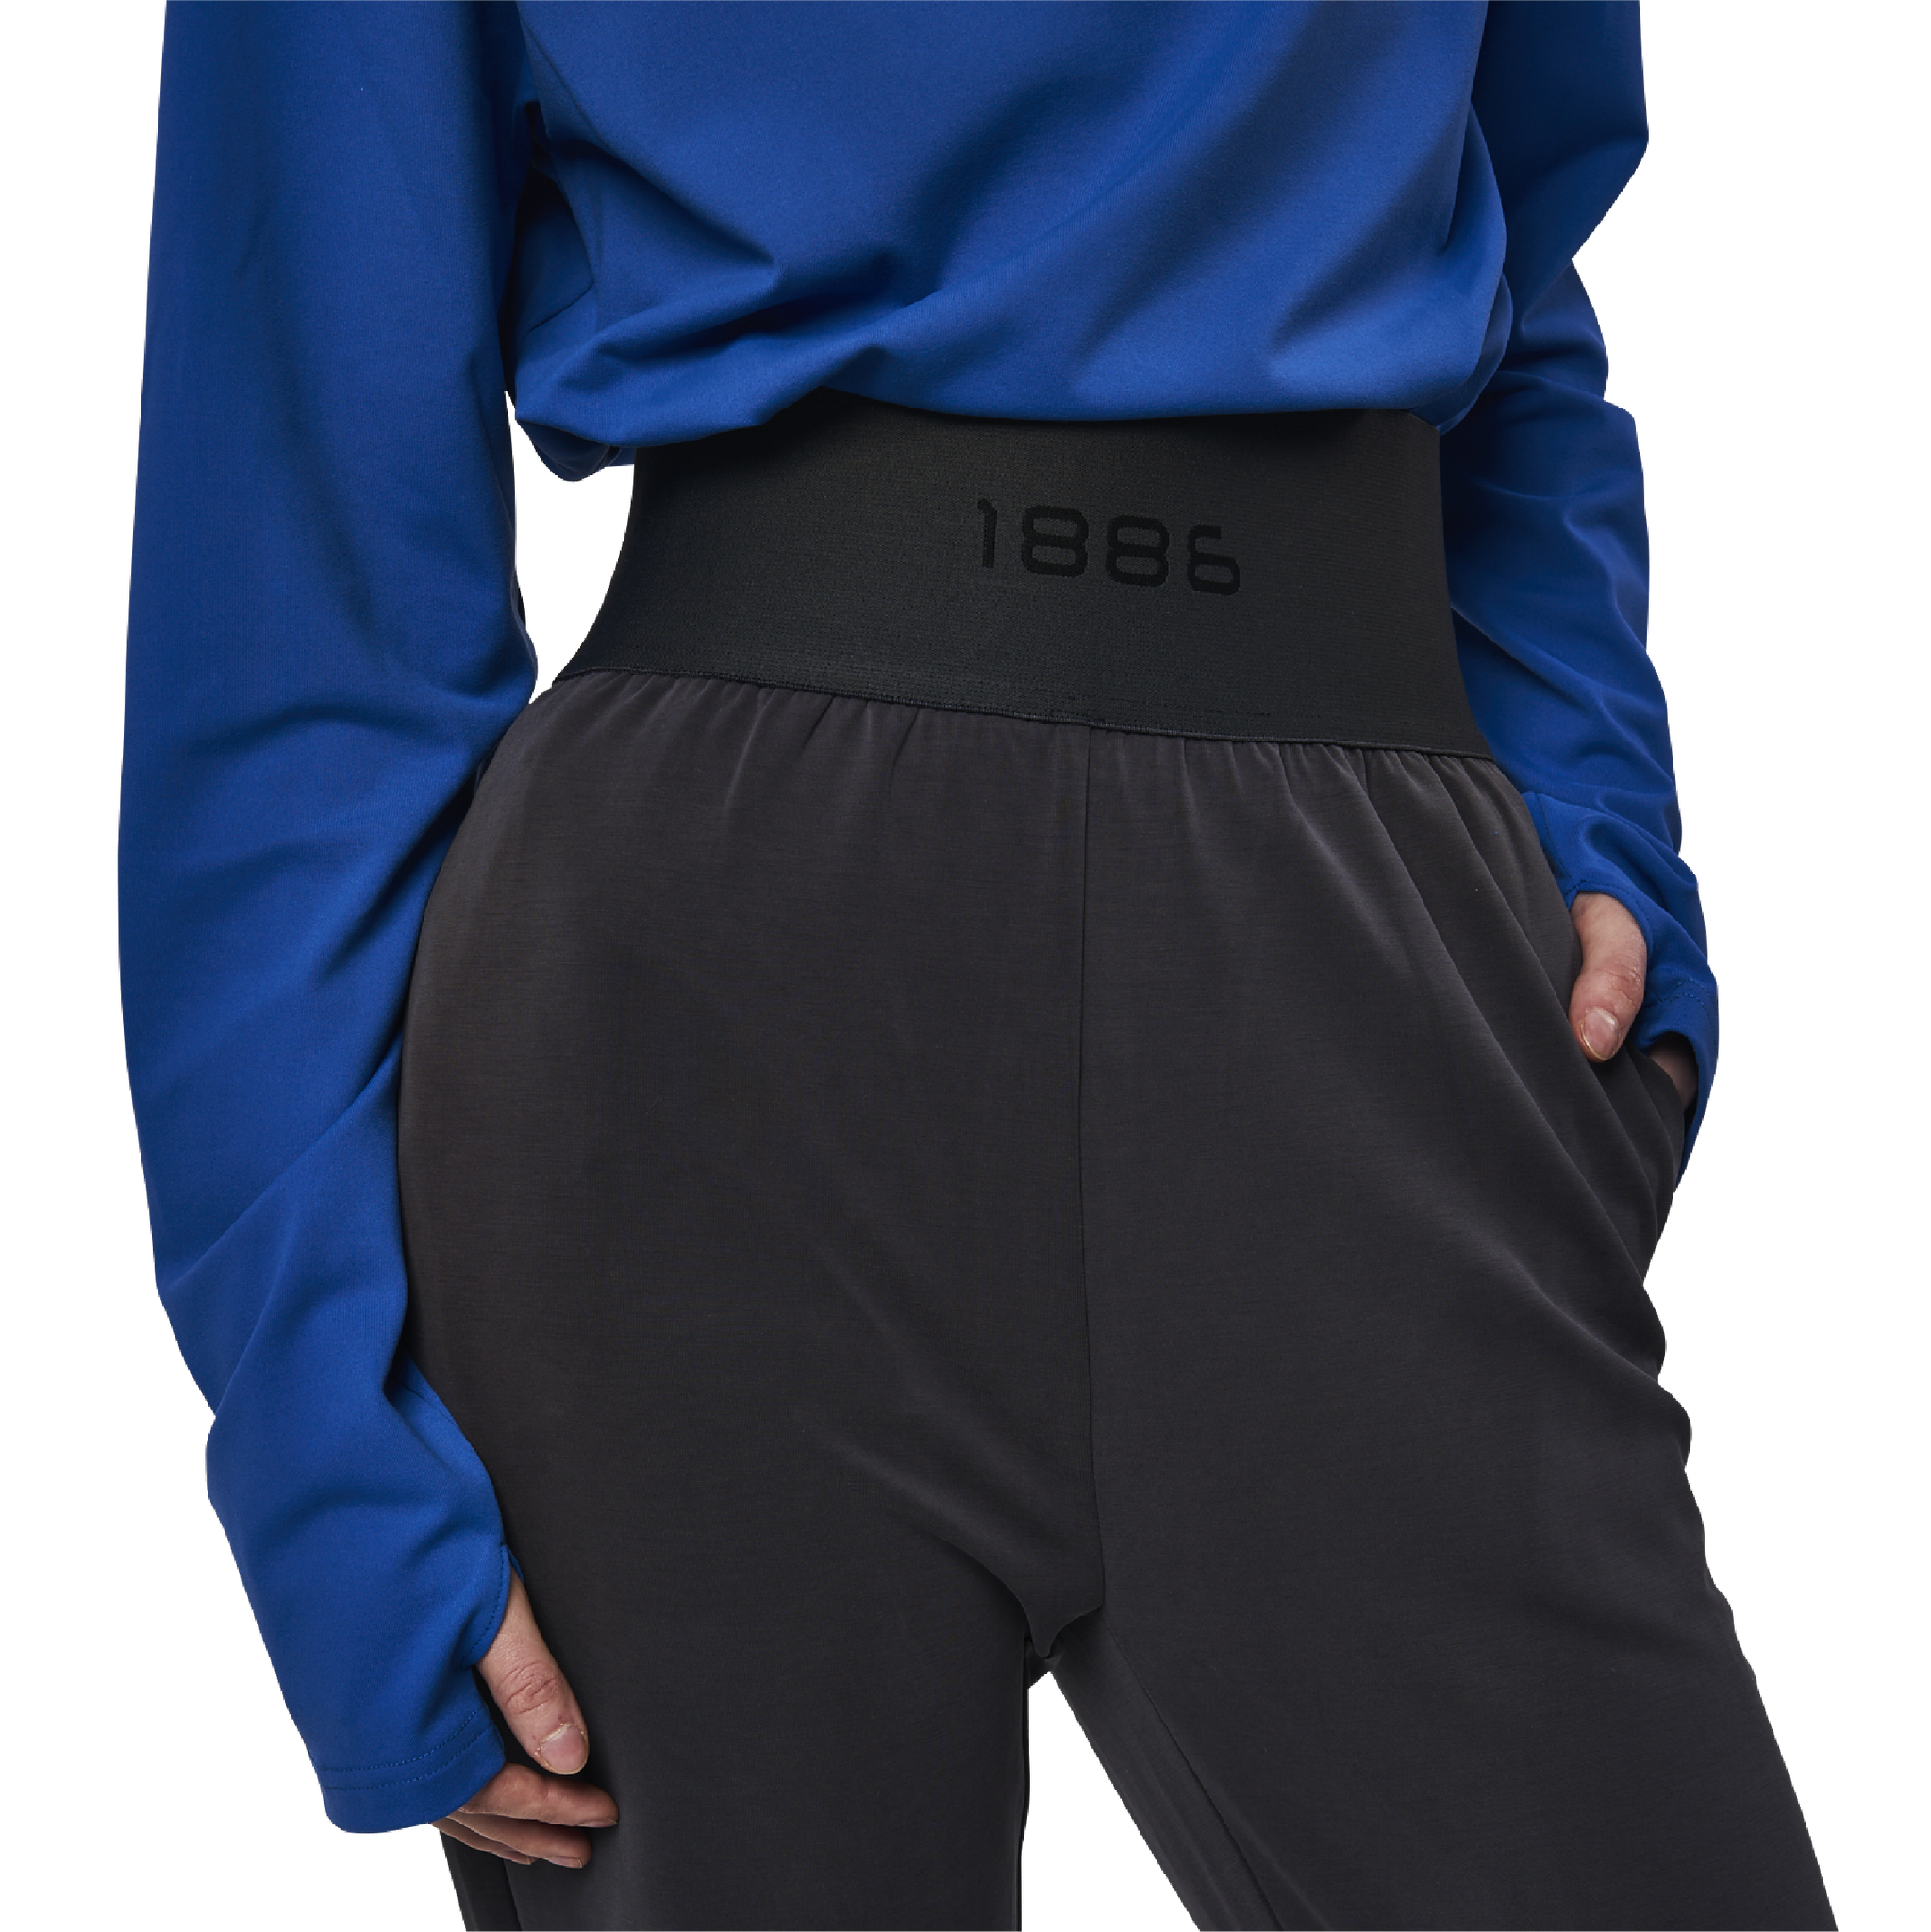 Classic wide leg cut pants in charcoal grey fabric featuring 1886 logo sewn at waist. Elastic waistband. High waist. Pockets at side.